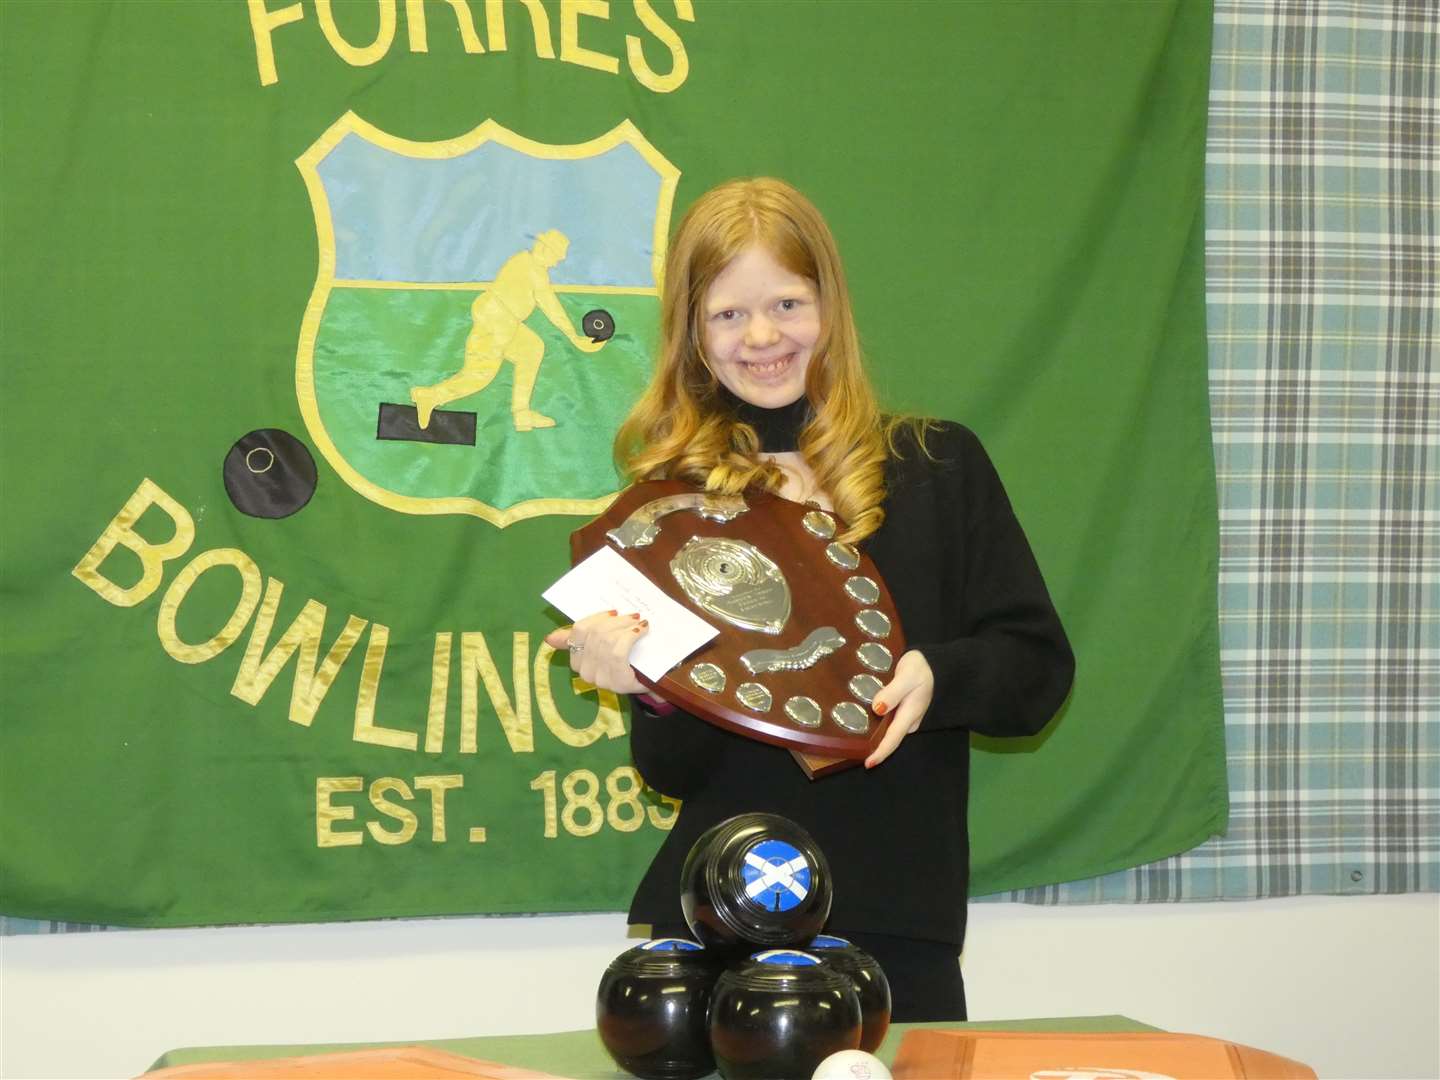 Caitlin Dustan won the triples tournament at Forres last year. The trophy will now be played in her memory.